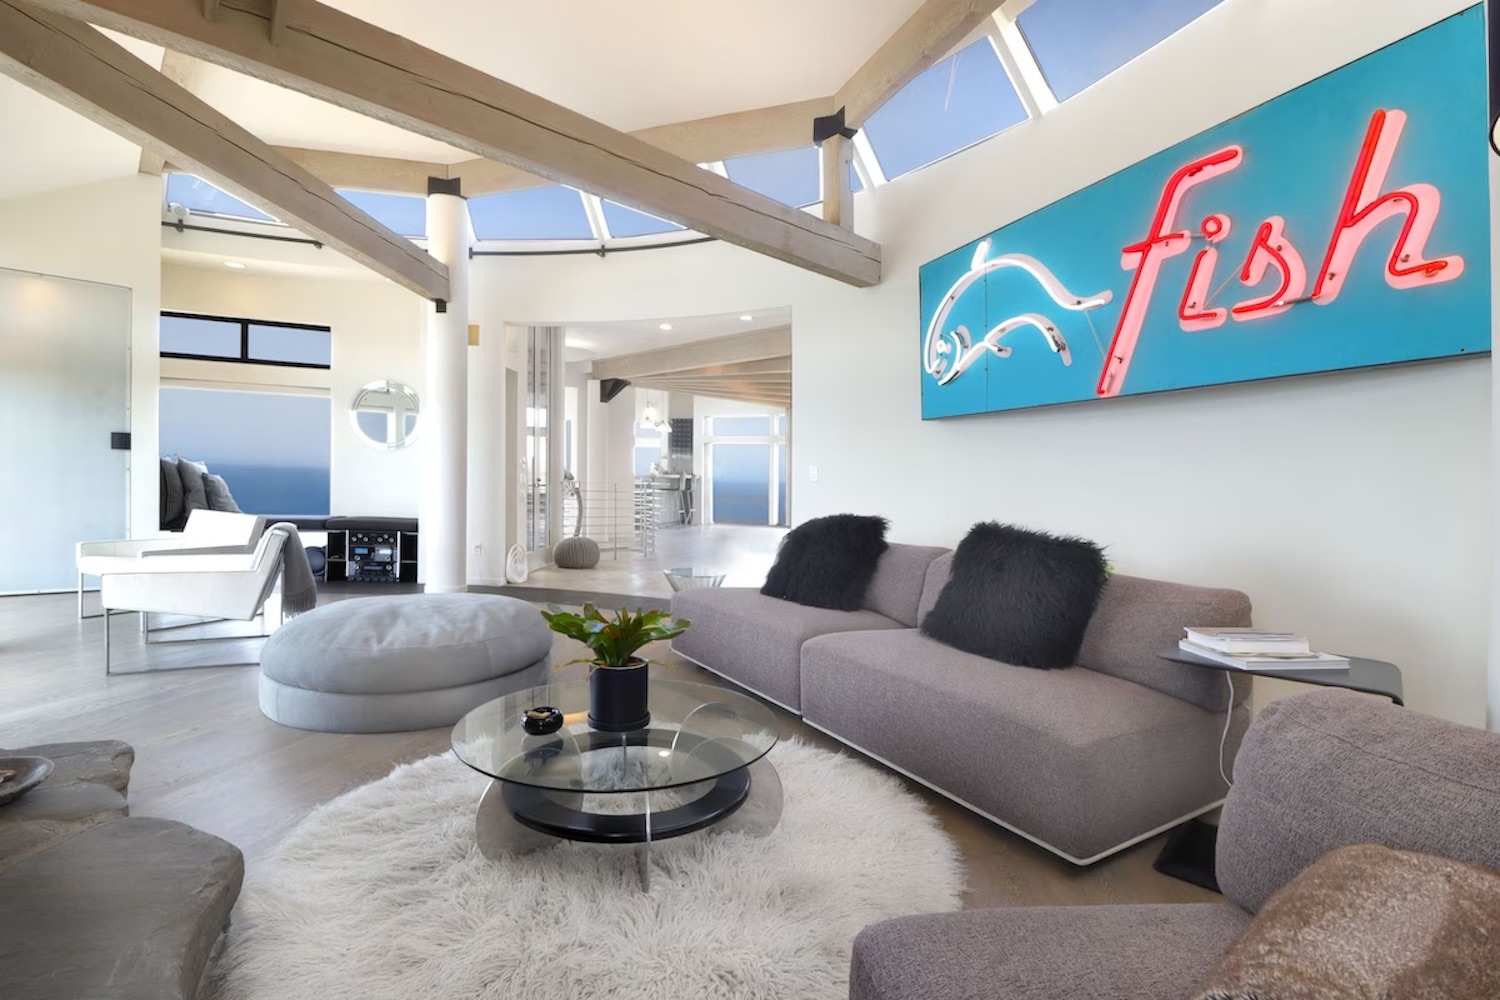 Gray and white living room with a "Fish" sign